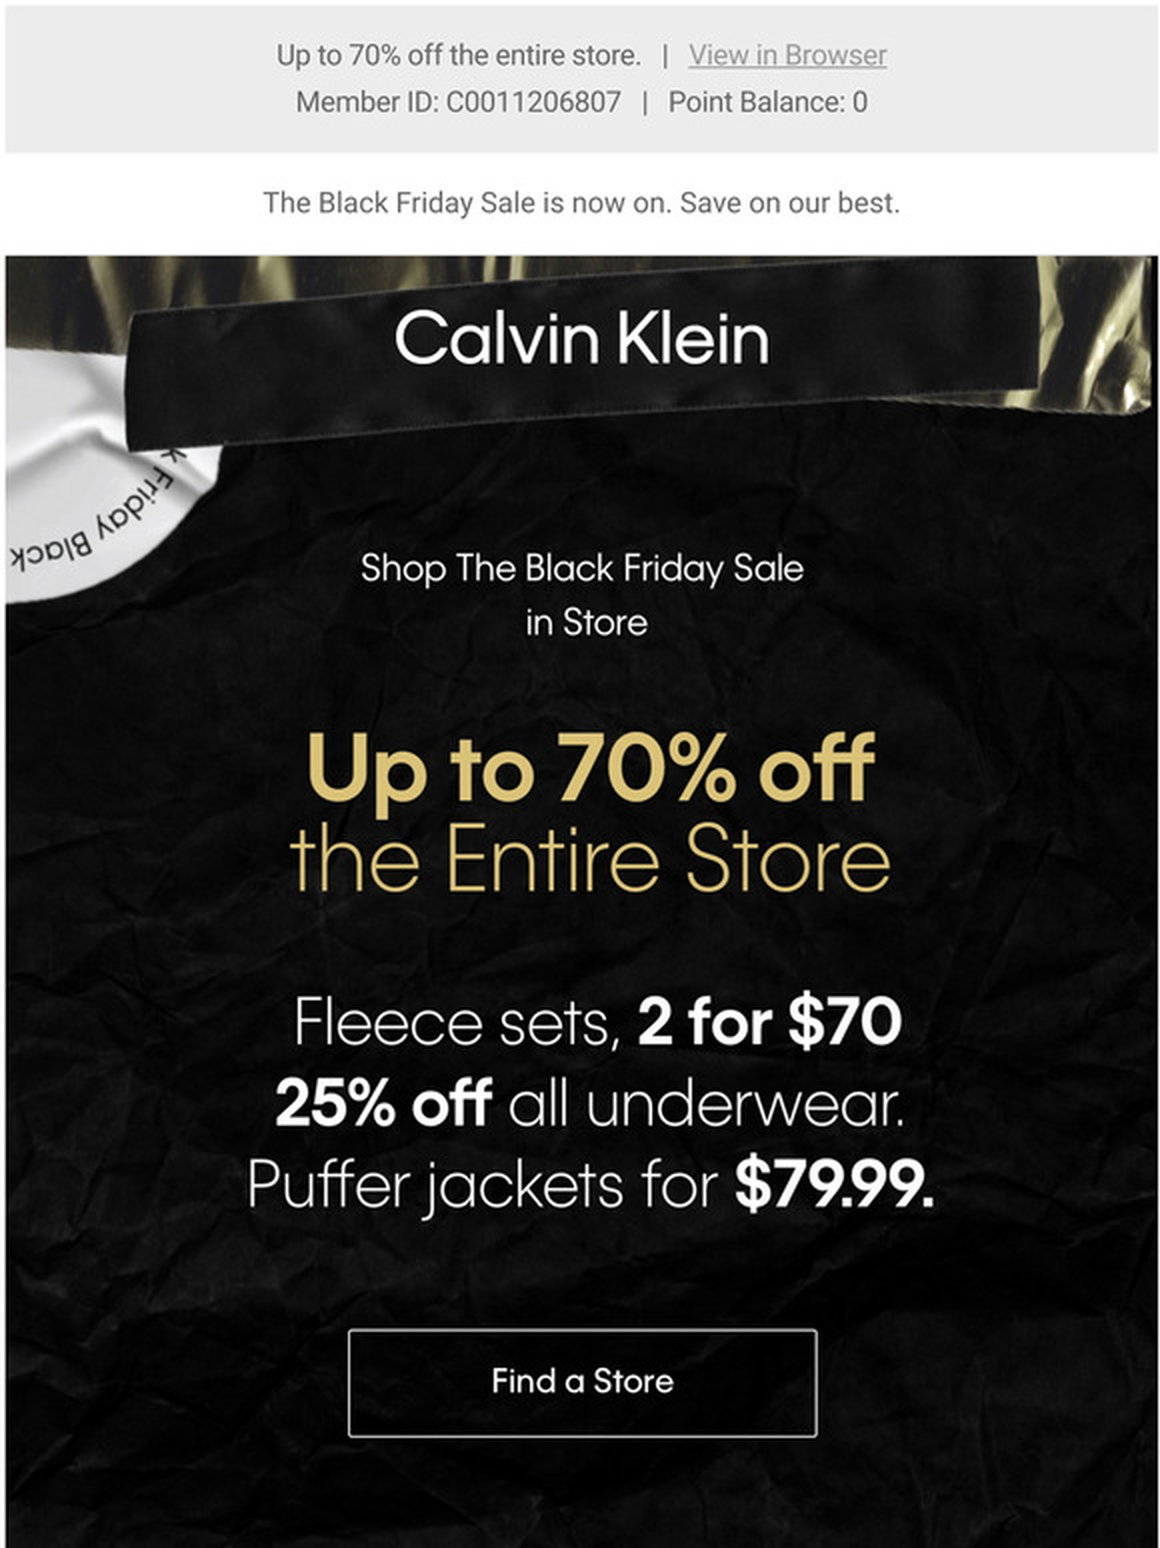 Calvin Klein: Shop Black Friday in Store Tomorrow | Milled